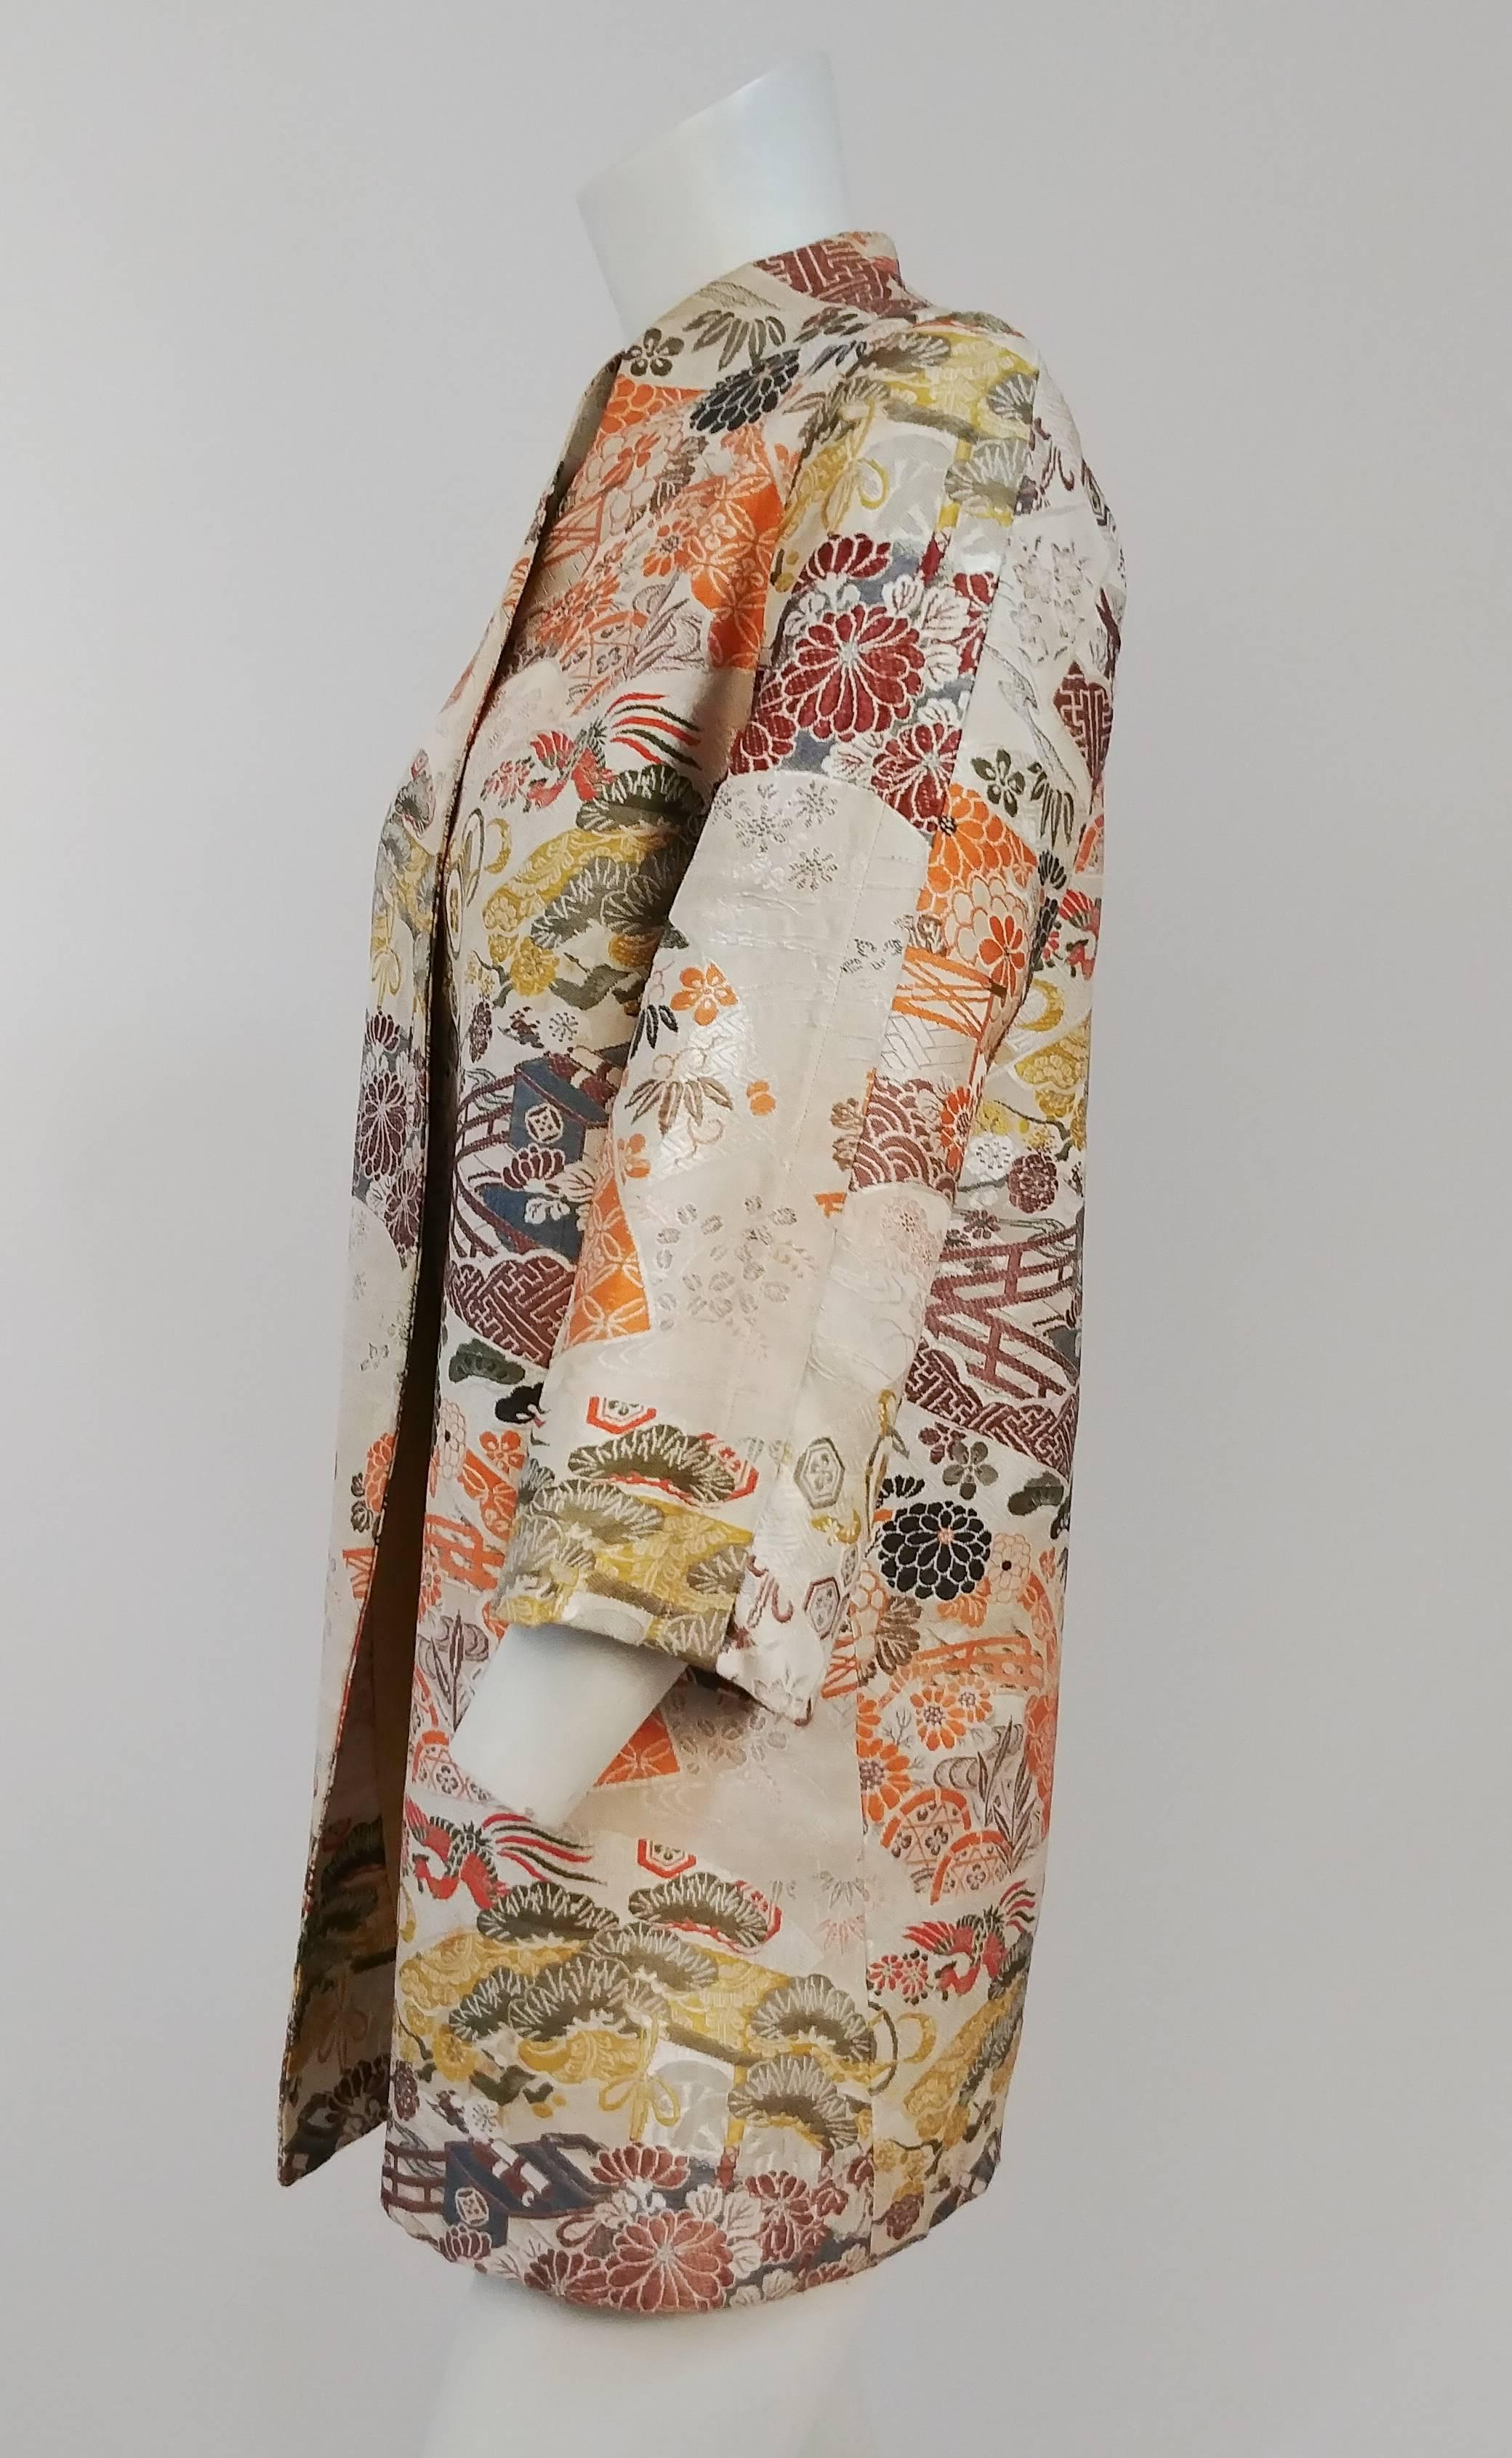 1960s Asian Brocade Jacket. High collar, no closures. Glove length sleeves. Pleated sleeve detail. Fully lined. 